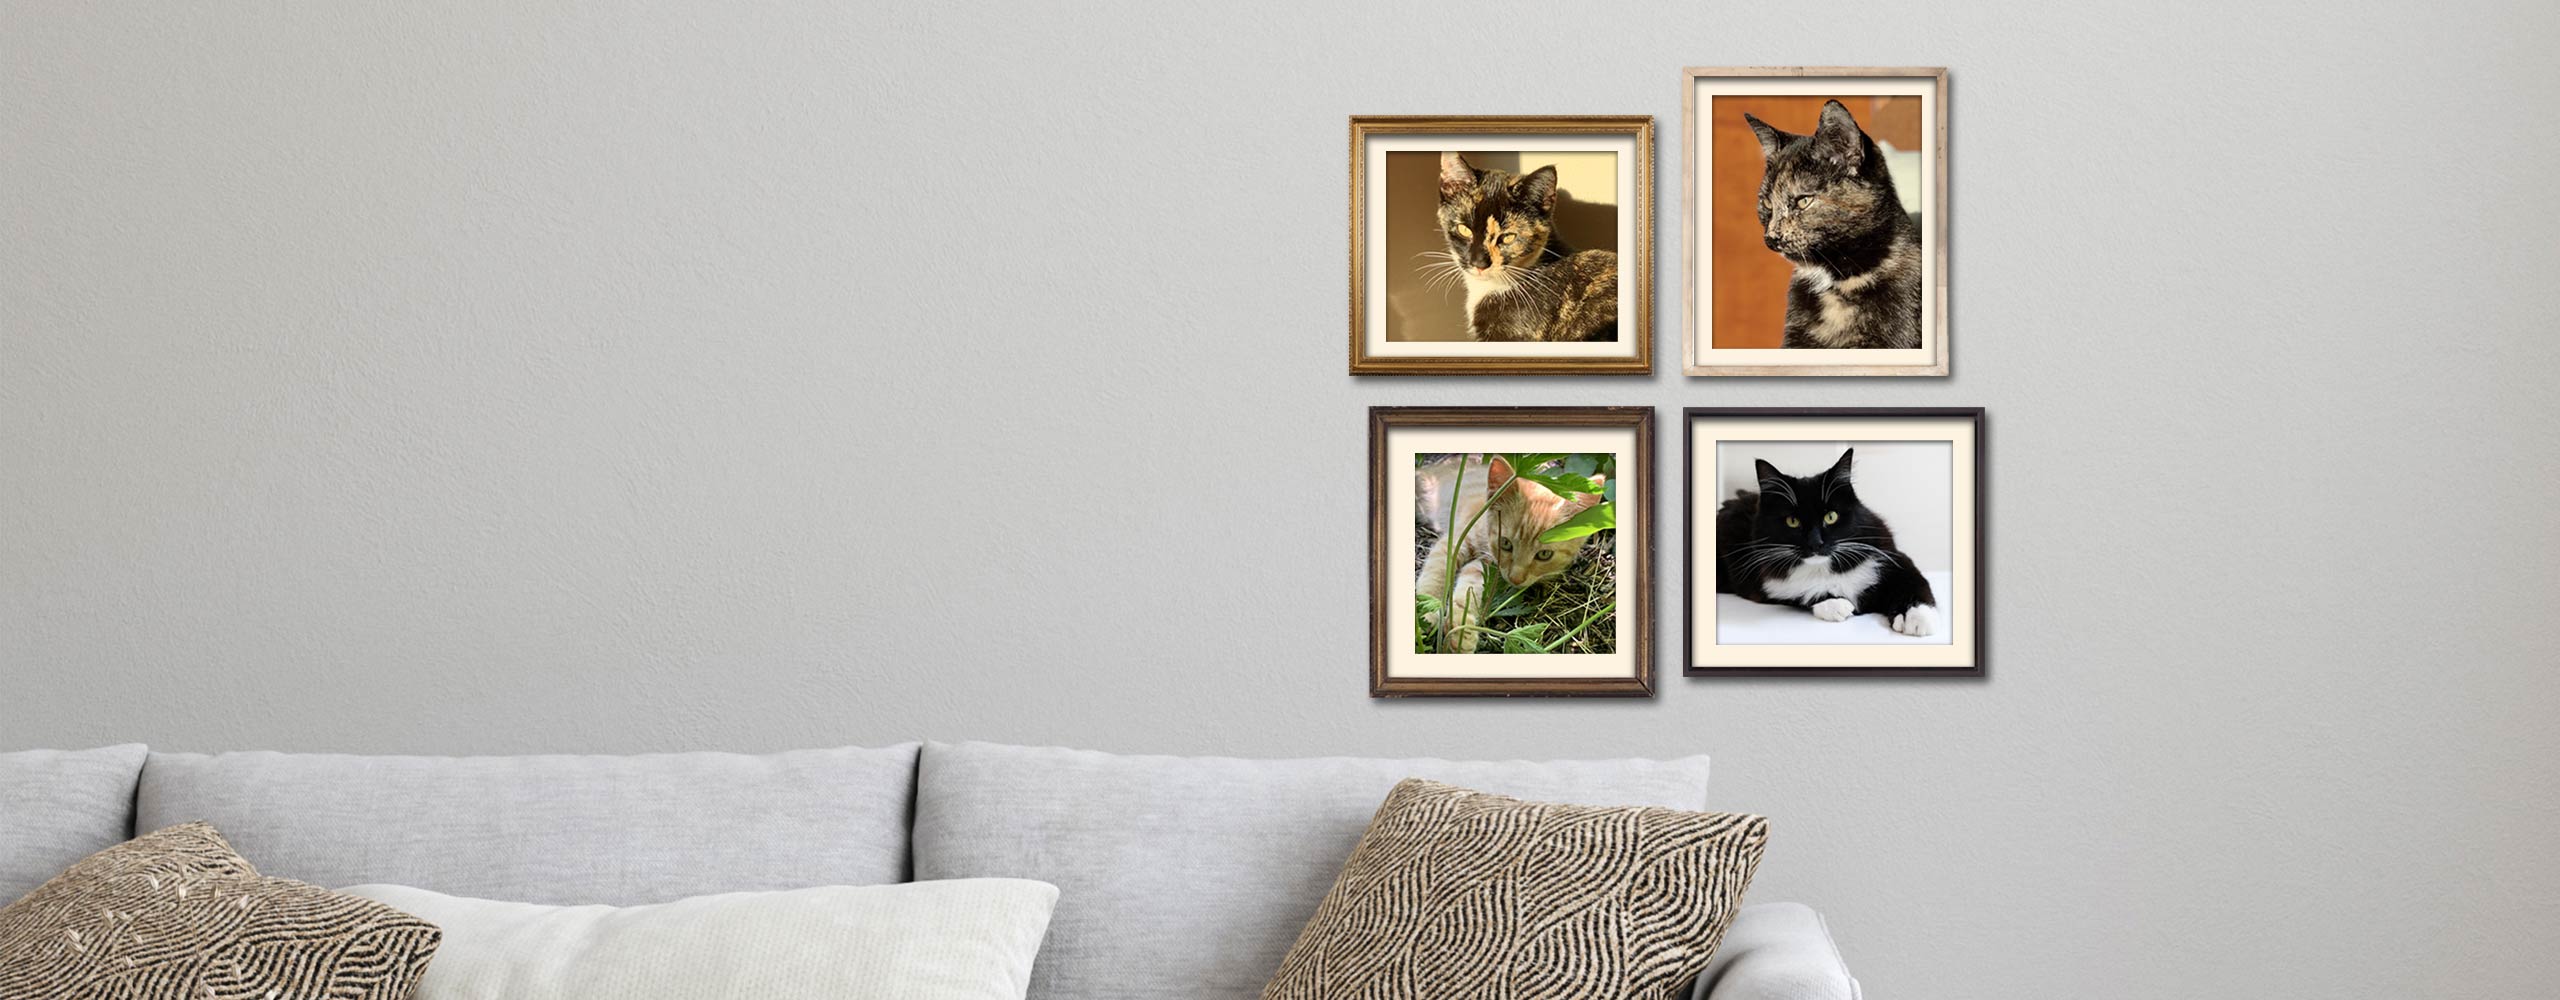 cat picture wall